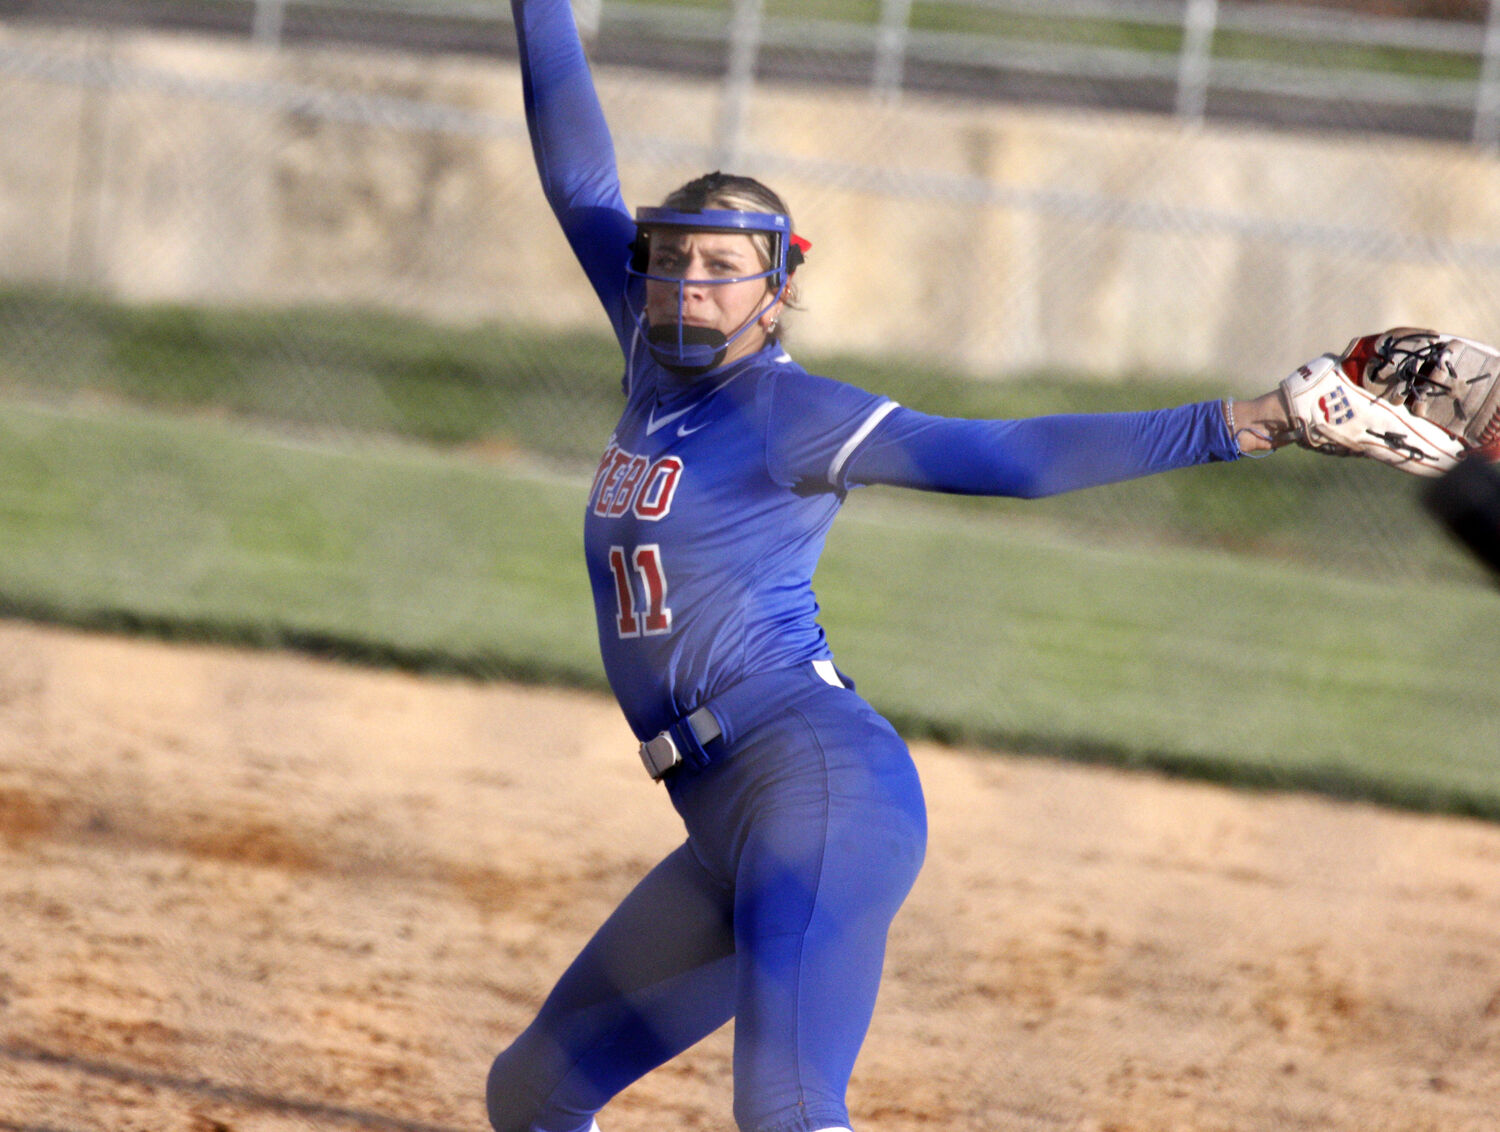 Western Boone softball triumphs over Danville in a 4-2 win with standout performances